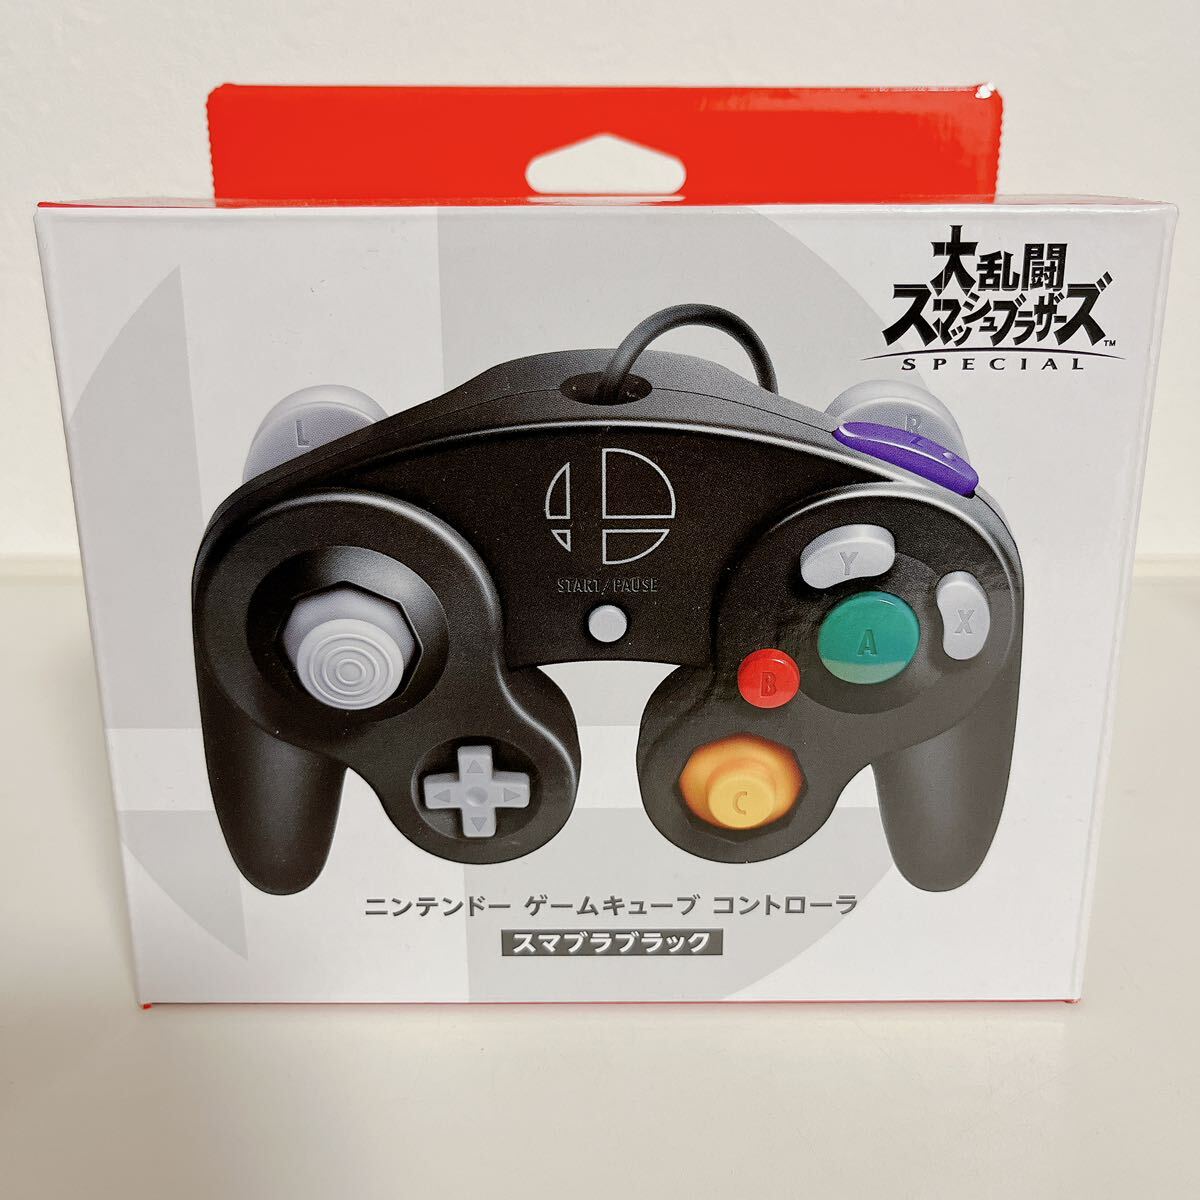 [ new goods * unused * unopened ] Game Cube controller smabla black Nintendo Switch Game Cube 